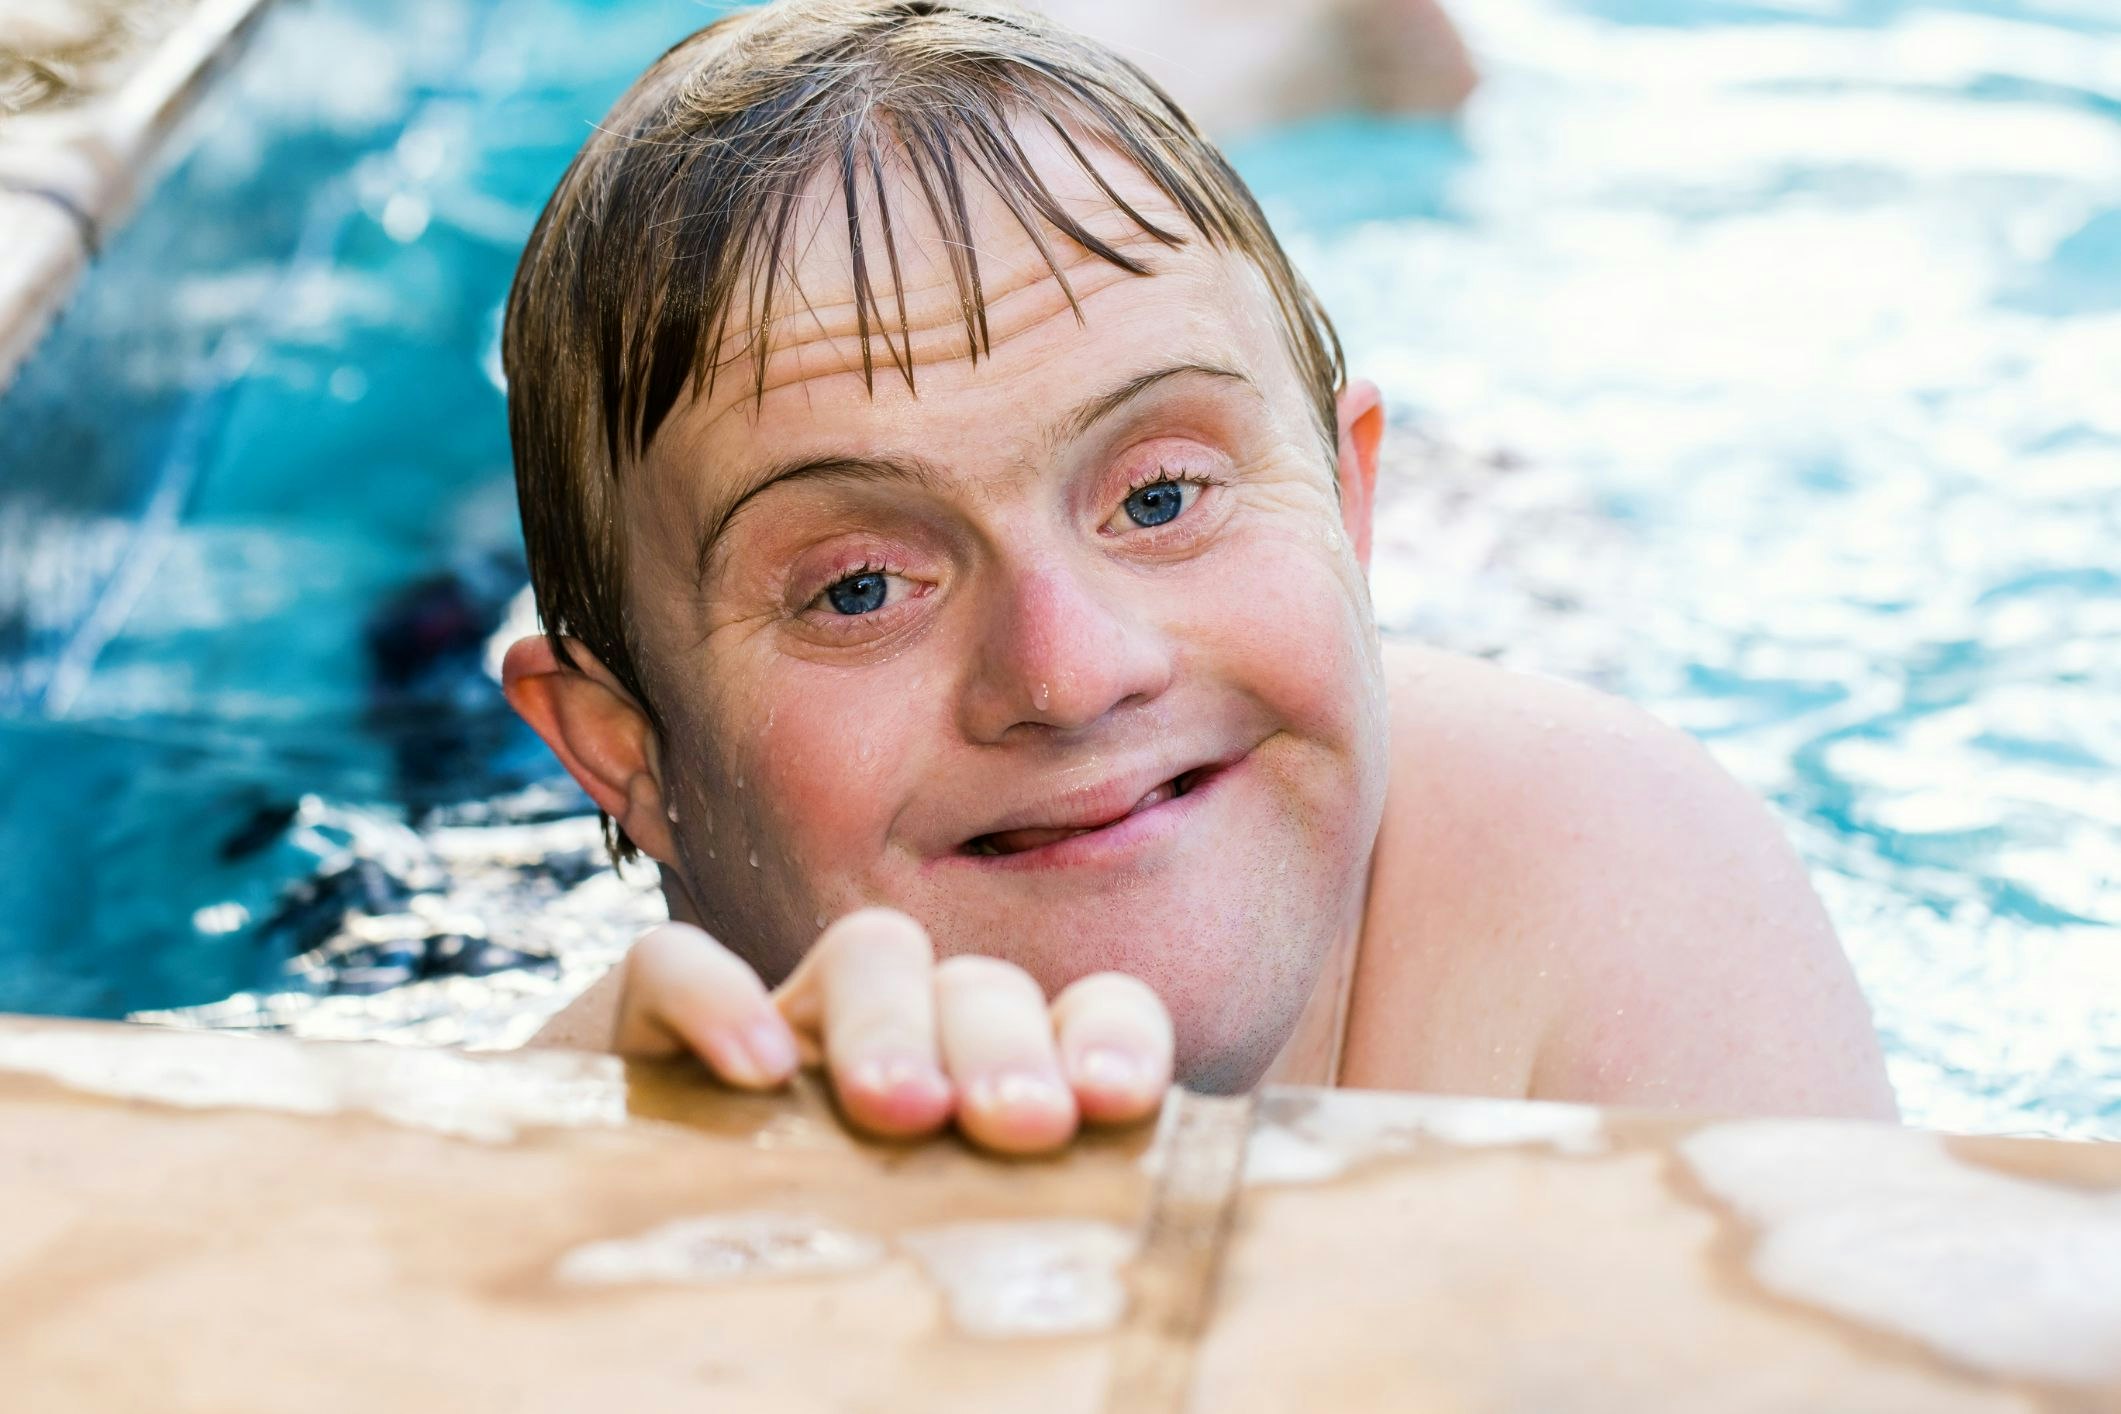 Special Olympics Australia has raised more funds through the SPLASH swimming event held recently. [Source: Shuttershock]
